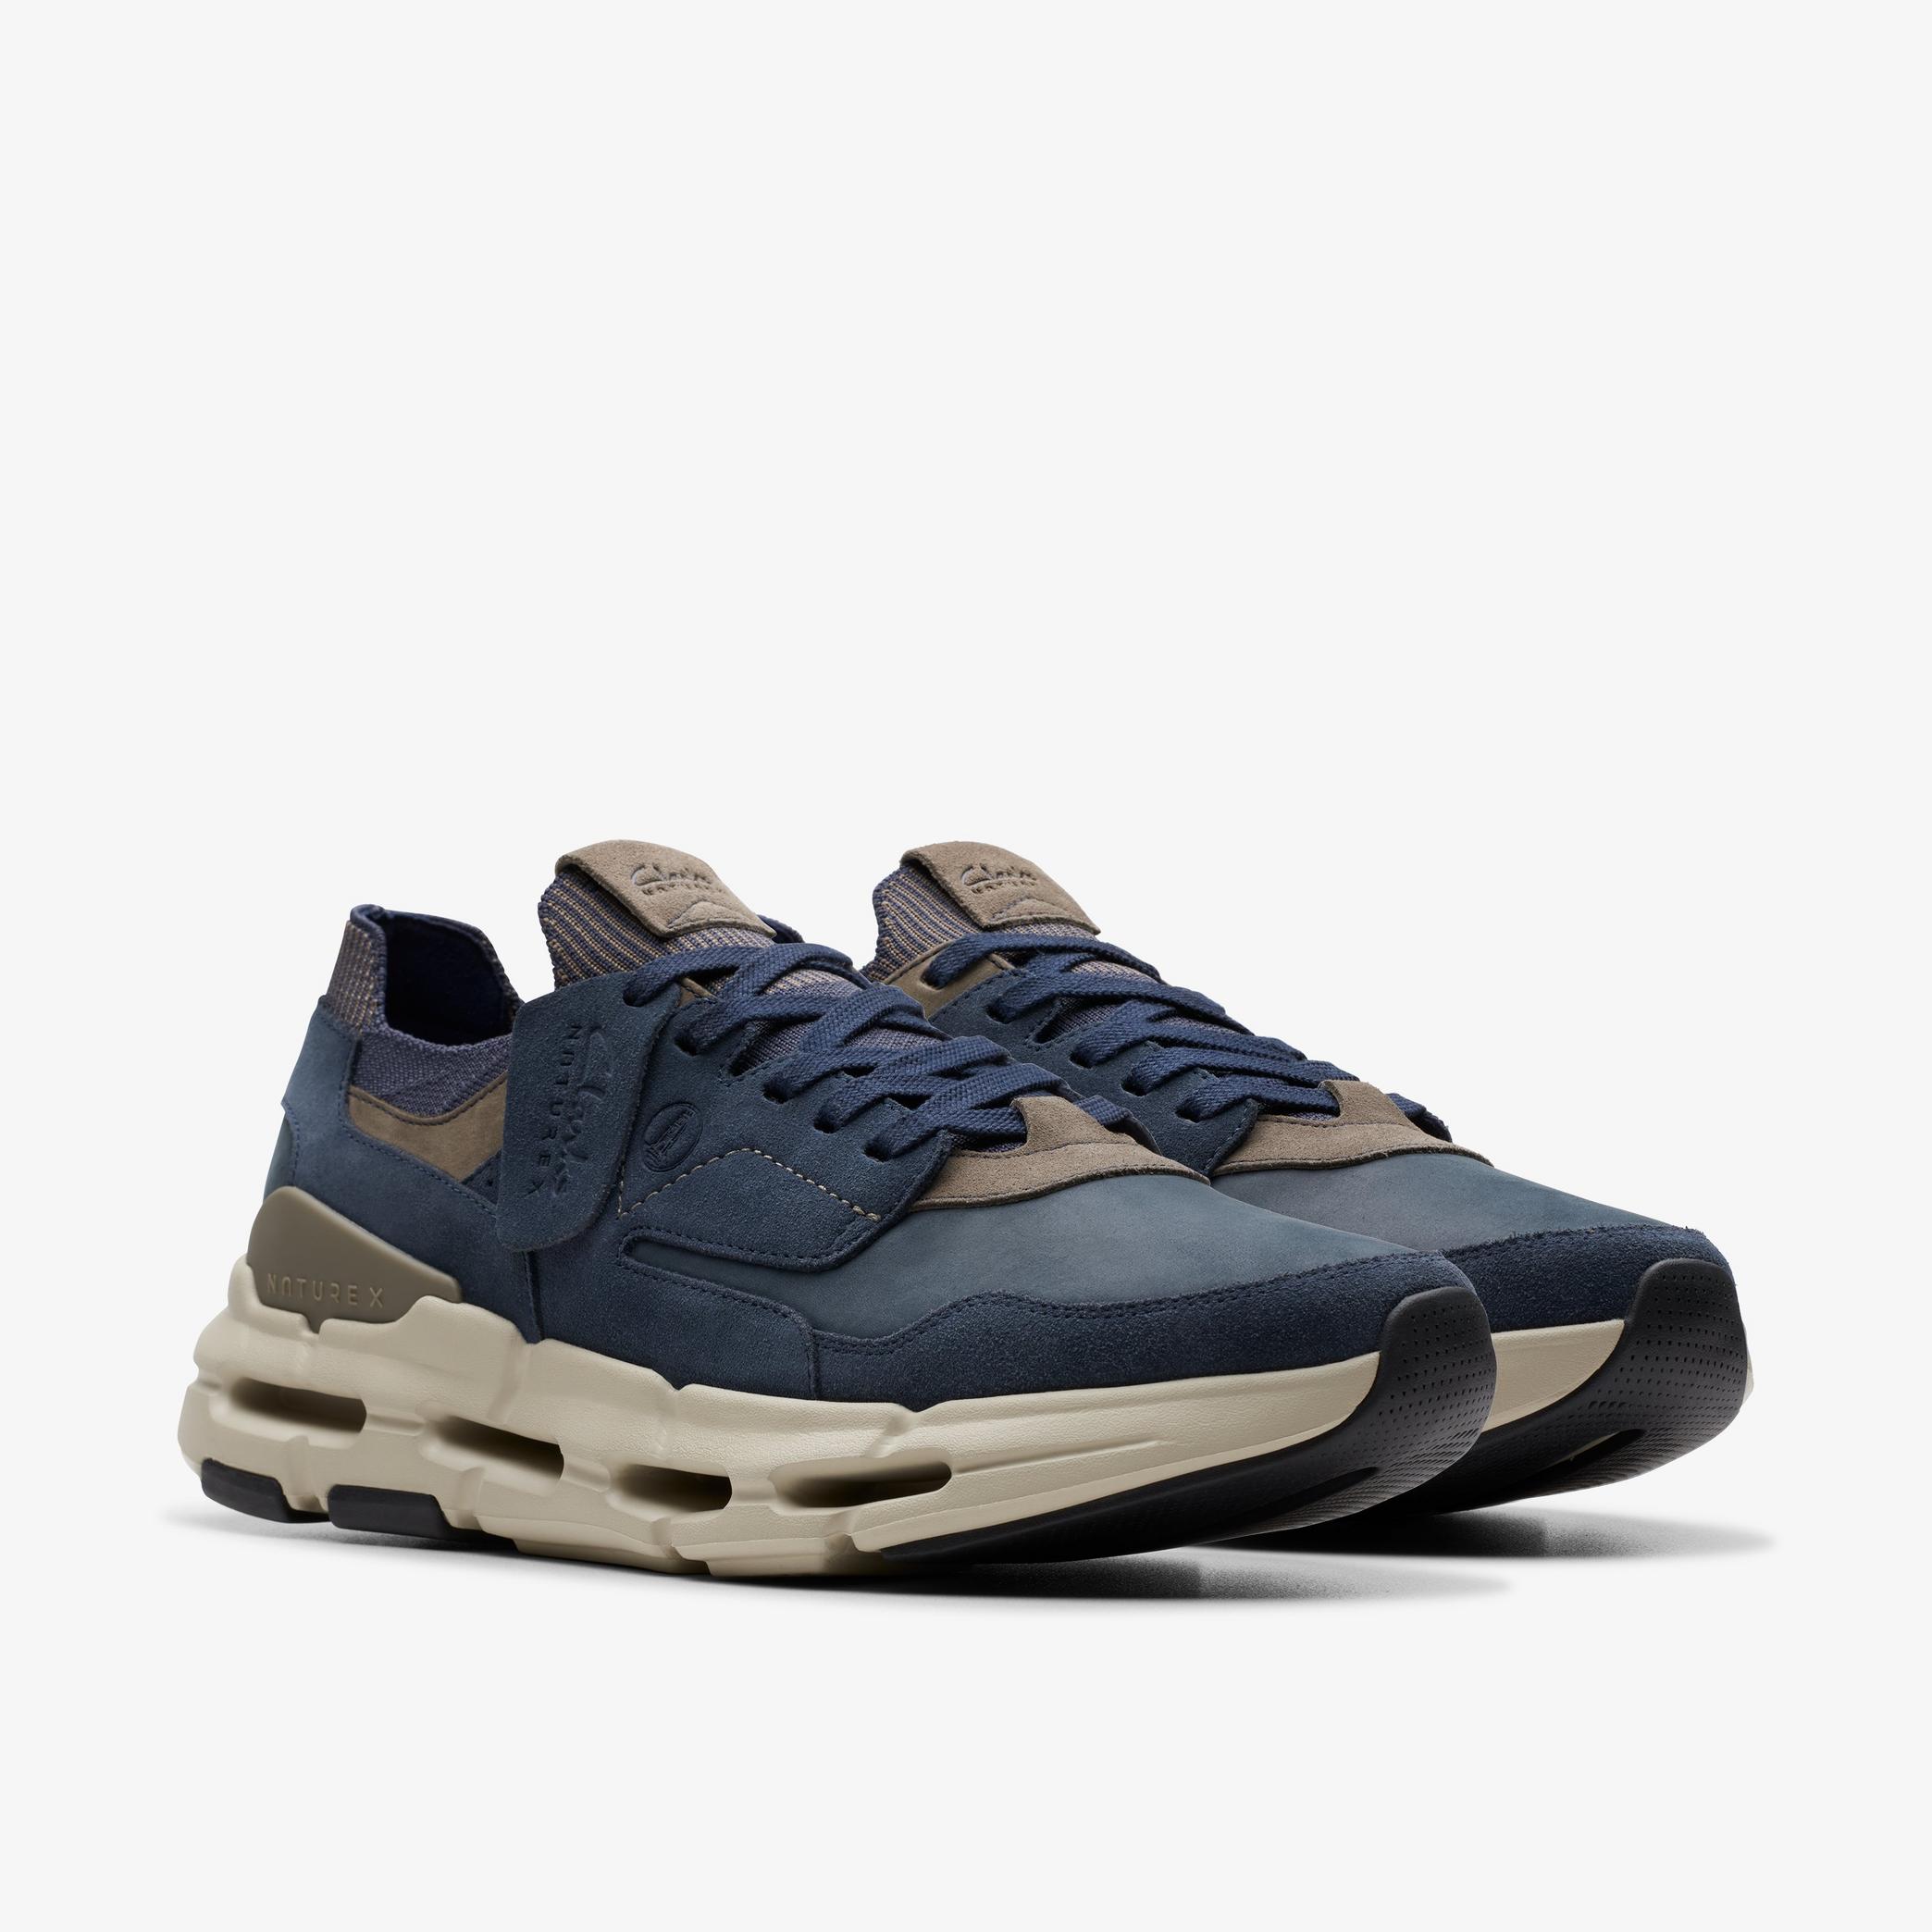 NXE Lo Navy Nubuck Shoes, view 4 of 7